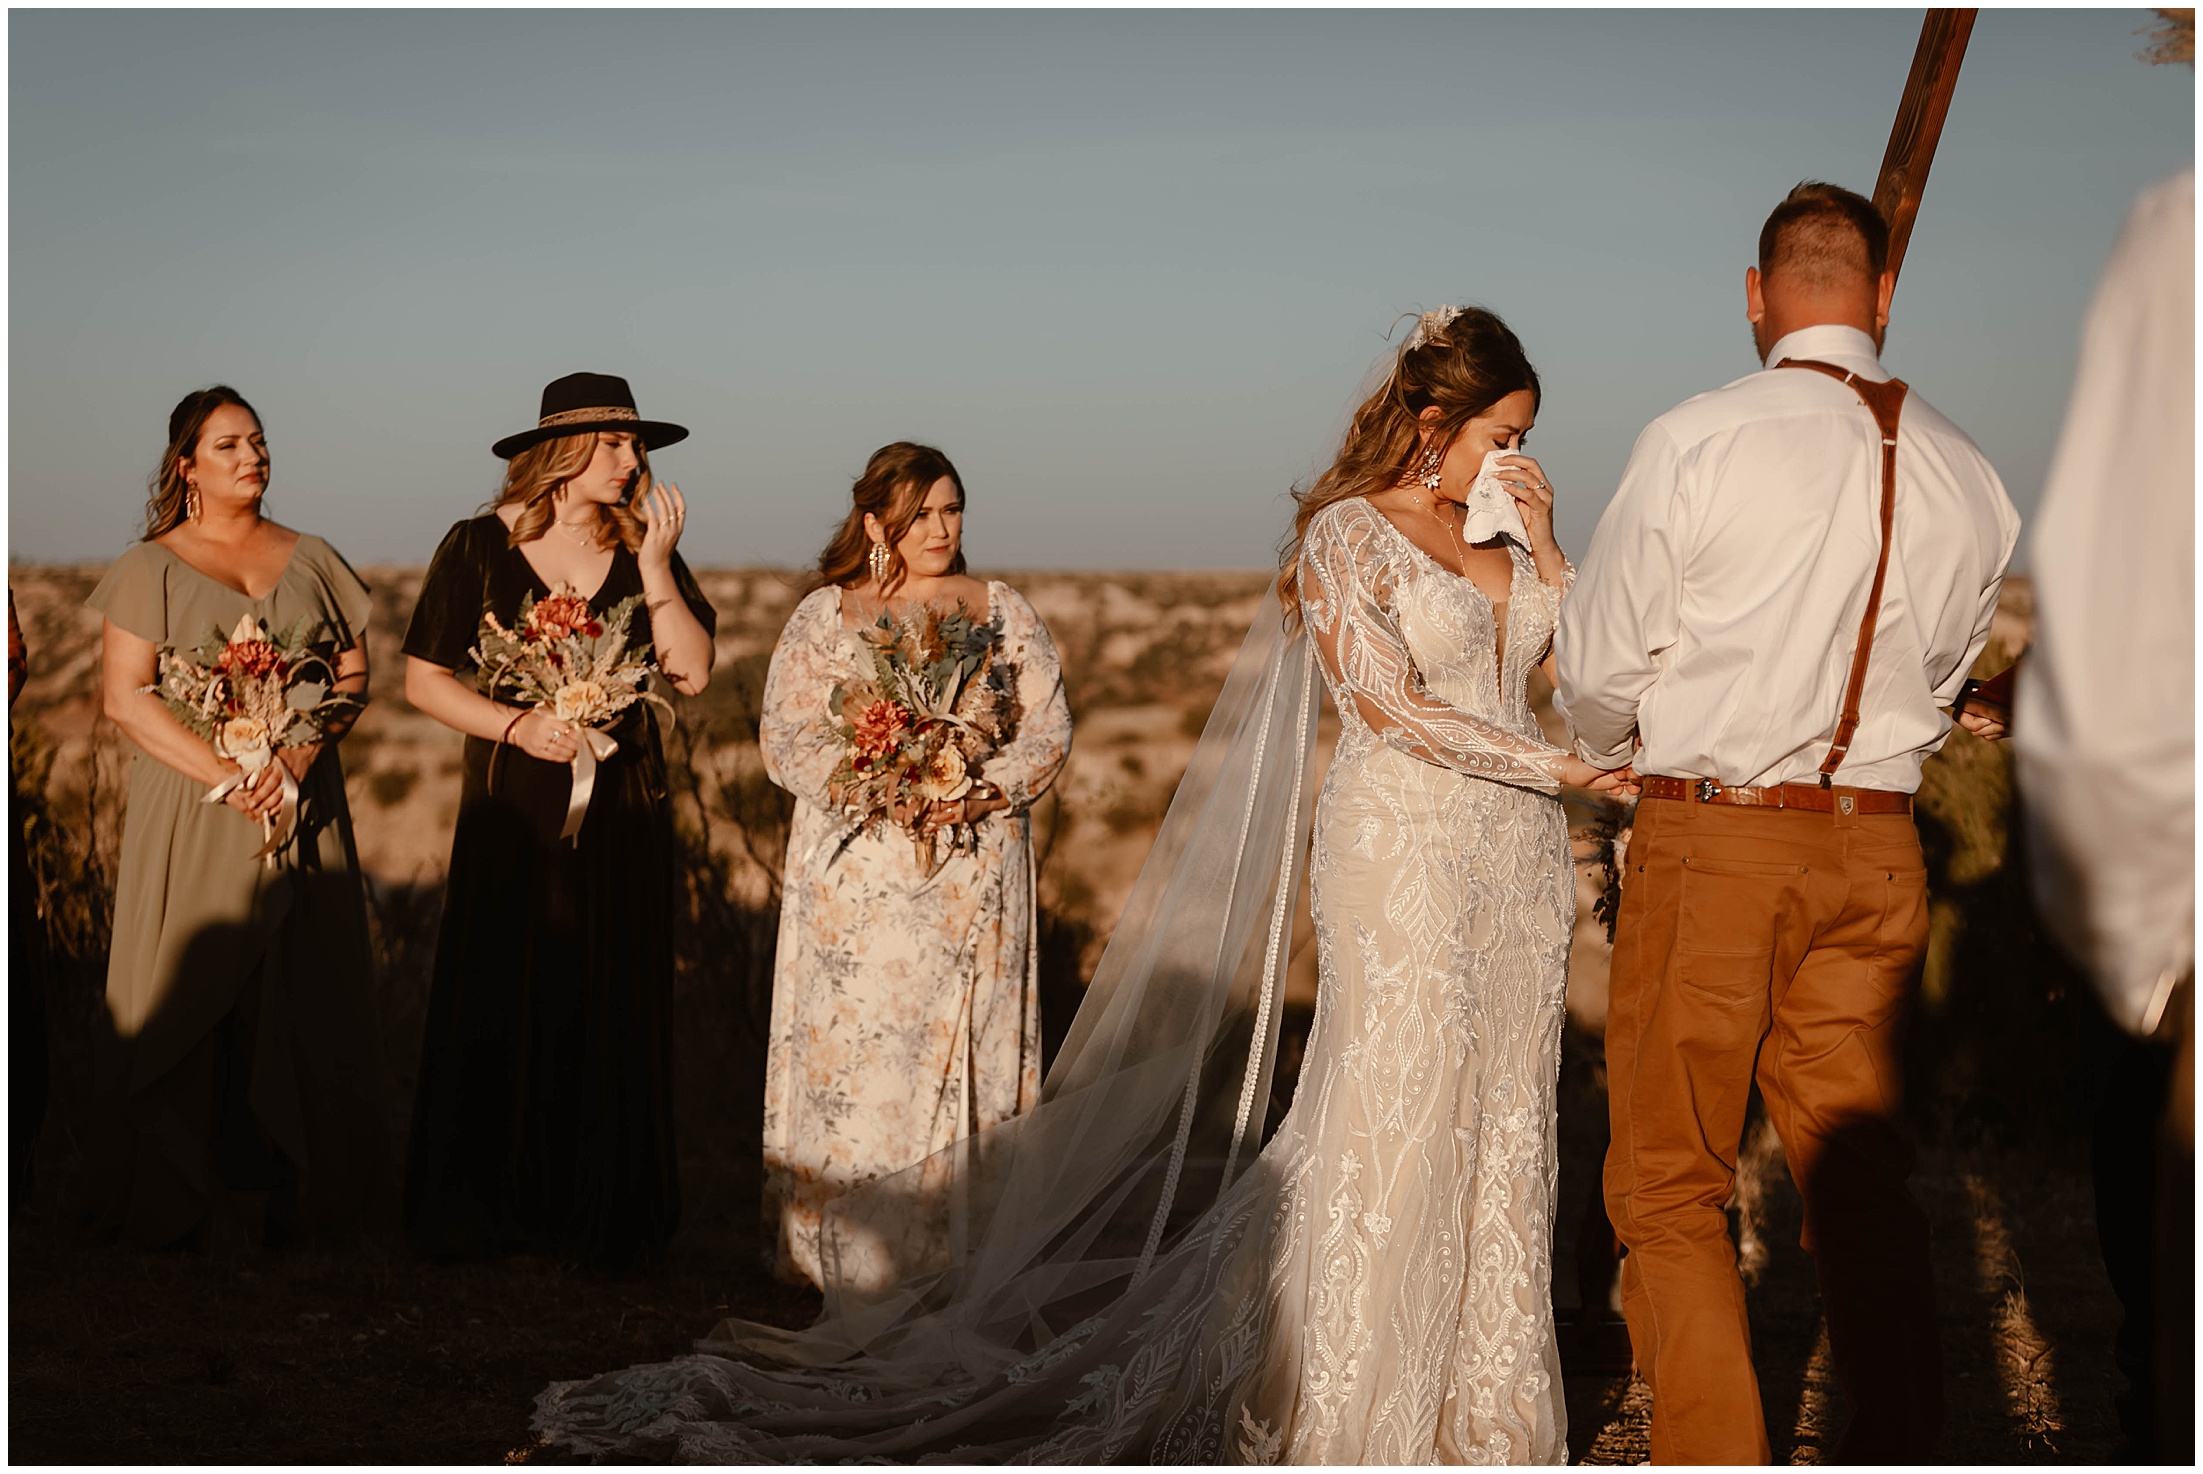 The Most EPIC place to Elope in Texas, elopement packages in Texas, Texas elopement packages, places to elope in texas, texas adventure elopements, texas elopement with guests, texas adventure wedding with guests, brit nicole photography